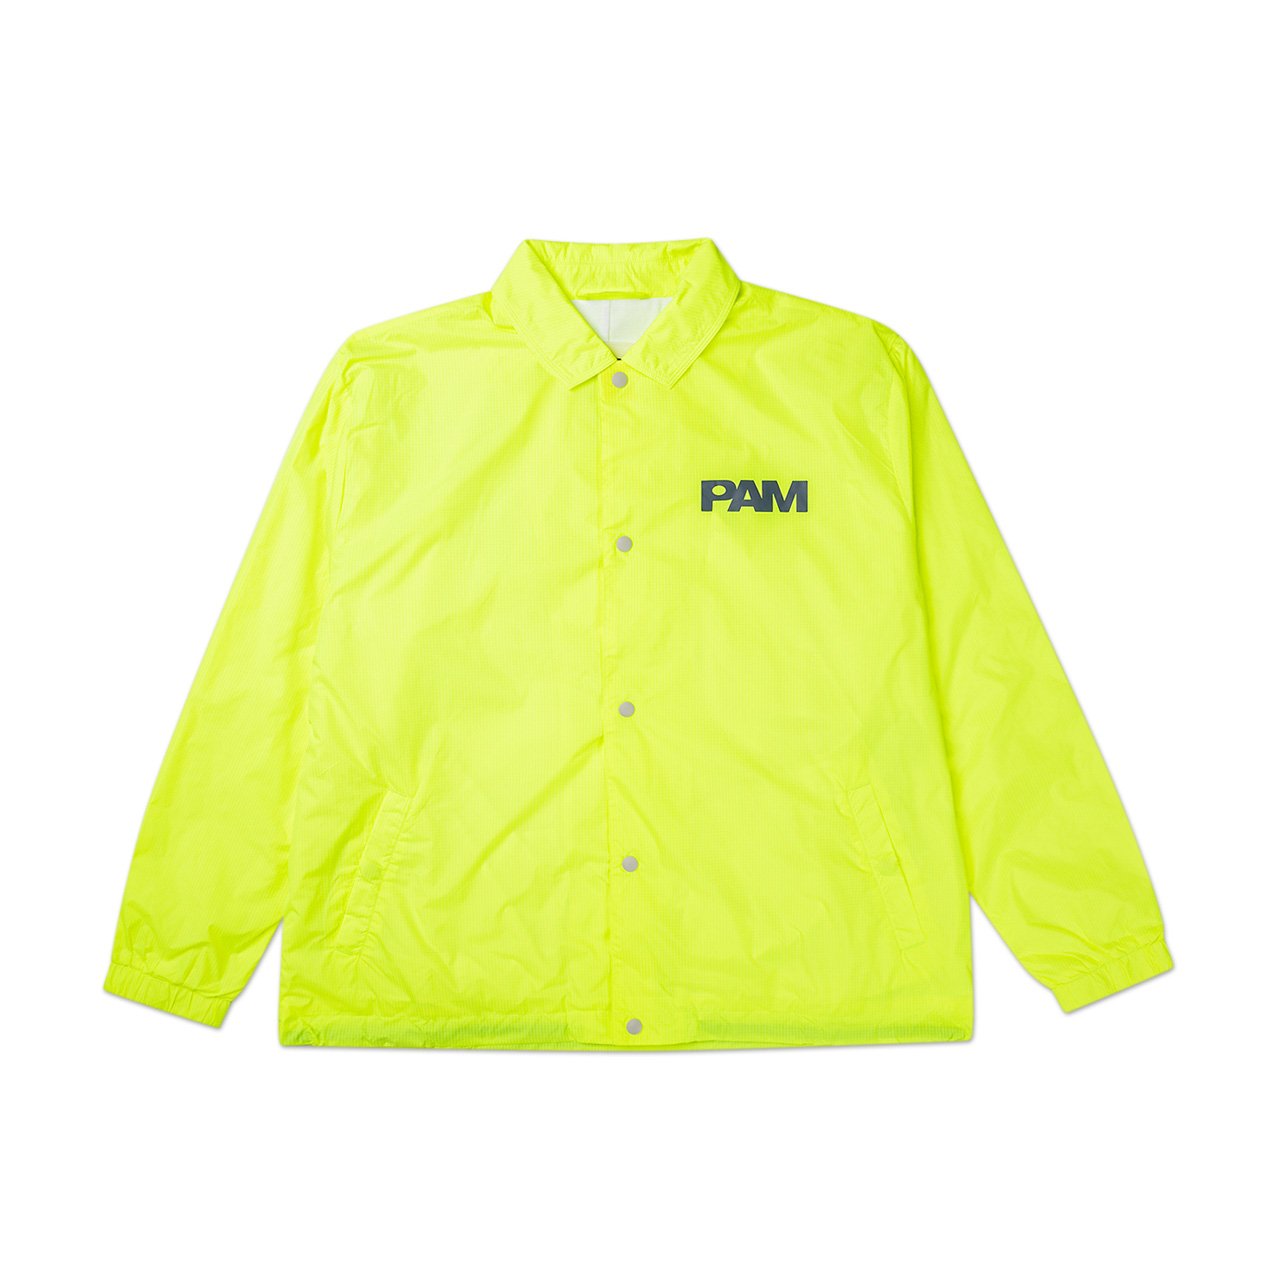 perks and mini alien morphosis coach jacket (neon yelllow) - 39069-fy - a.plus - Image - 1